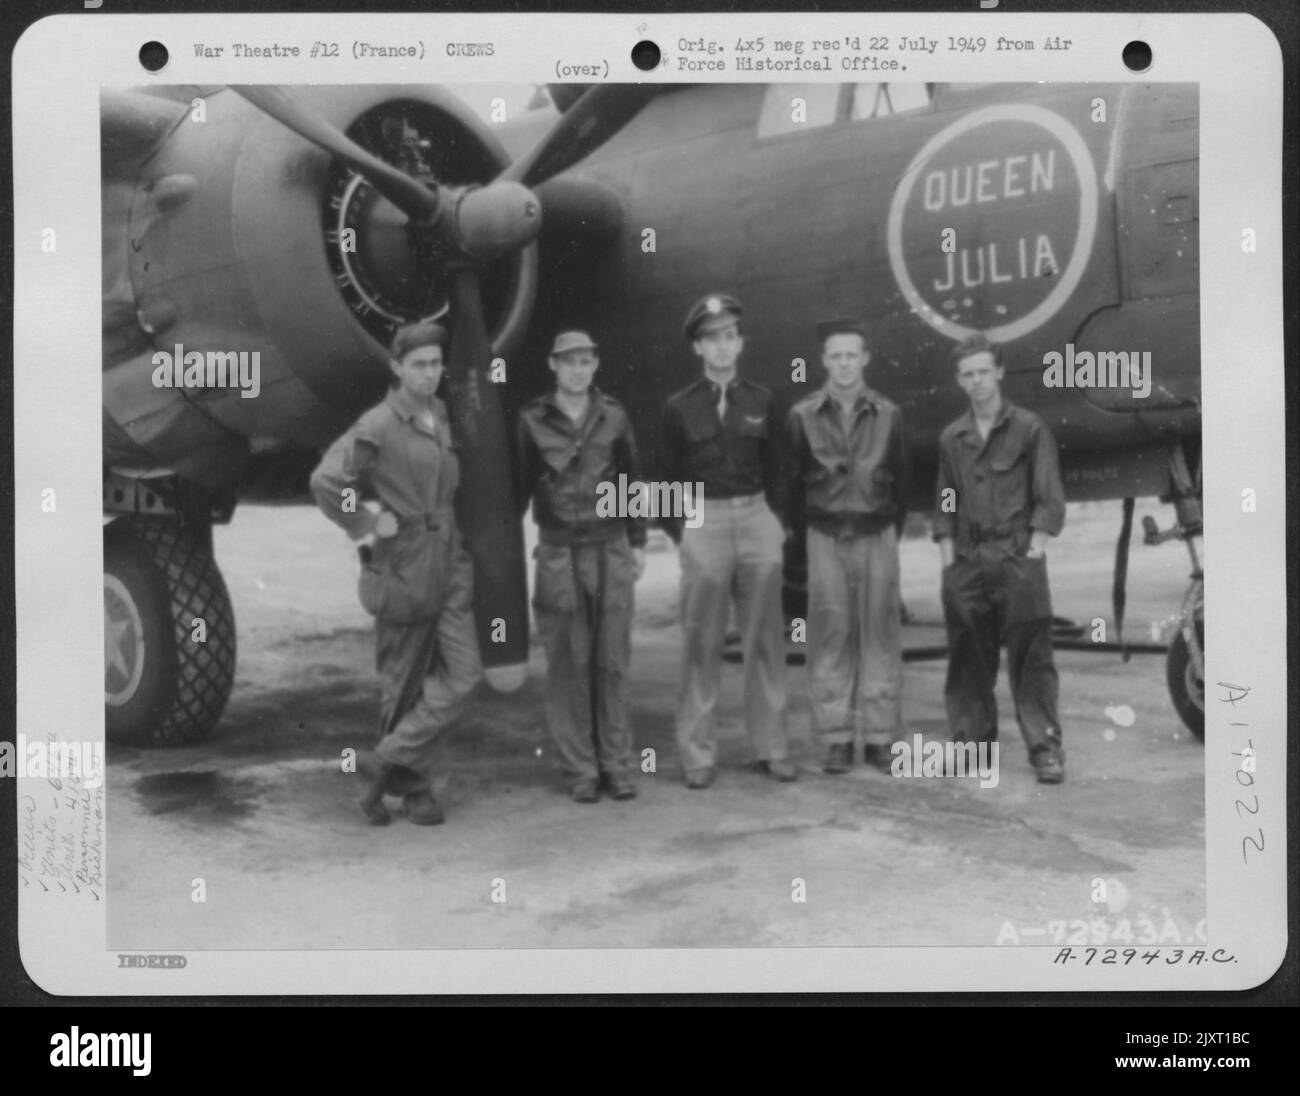 Lt. Bickley And Crew Of The 646Th Bomb Squadron, 410Th Bomb Group Pose Beside A Douglas A-20 'Queen Julia' At A 9Th Air Force Base In France. Stock Photo